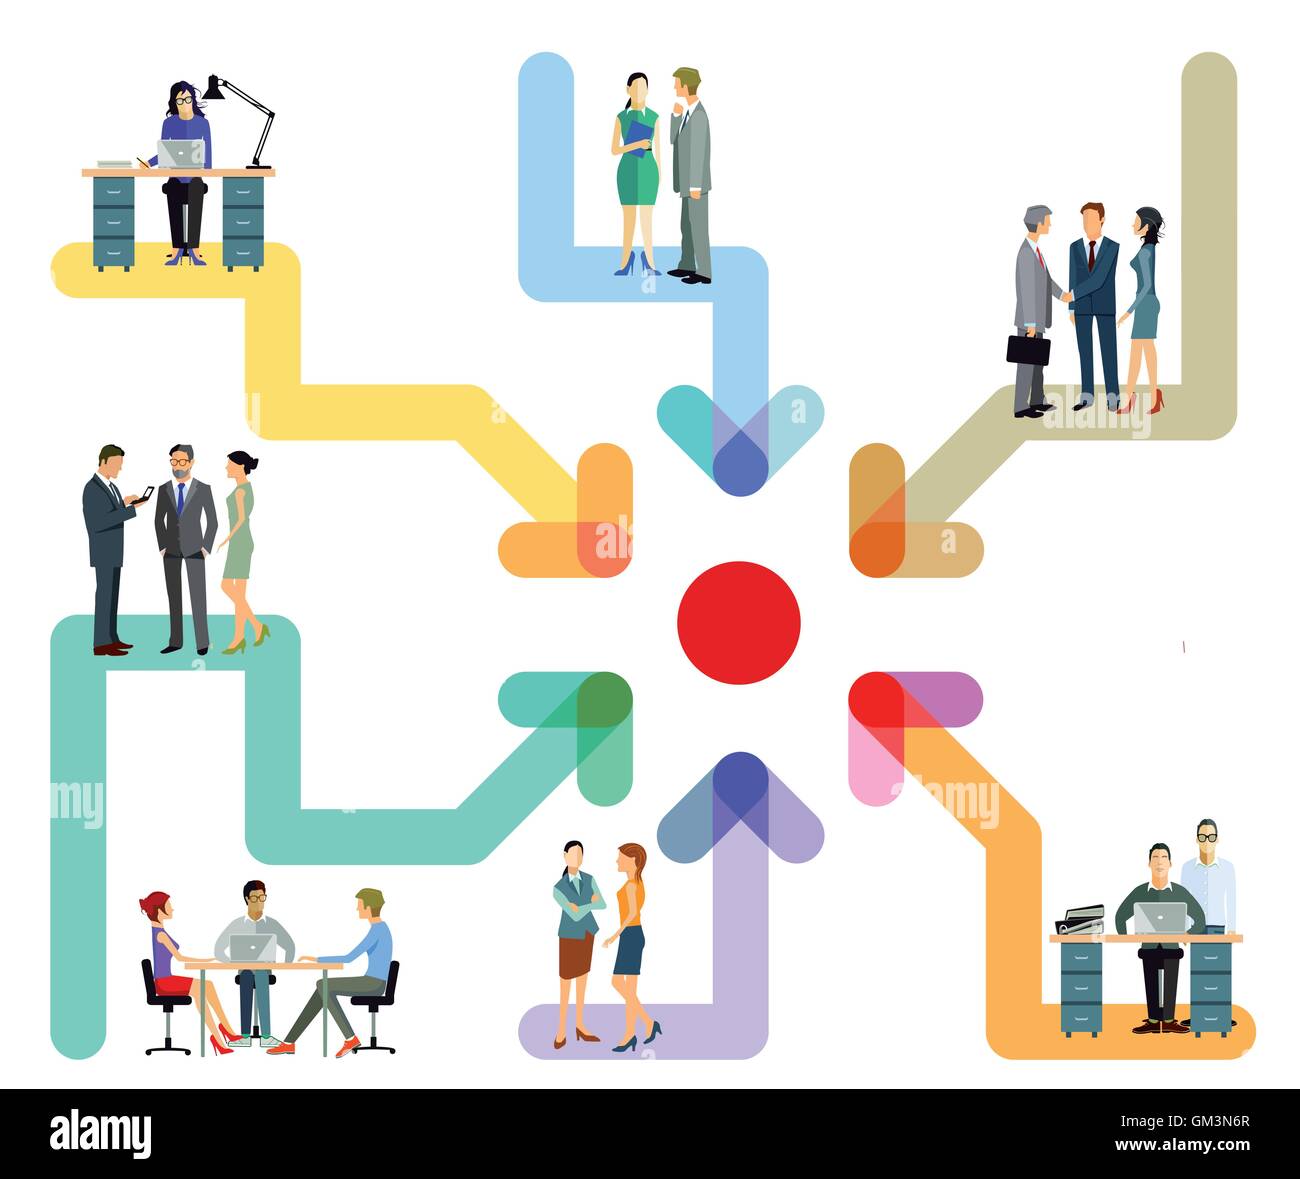 Employee collaboration in the office Stock Vector